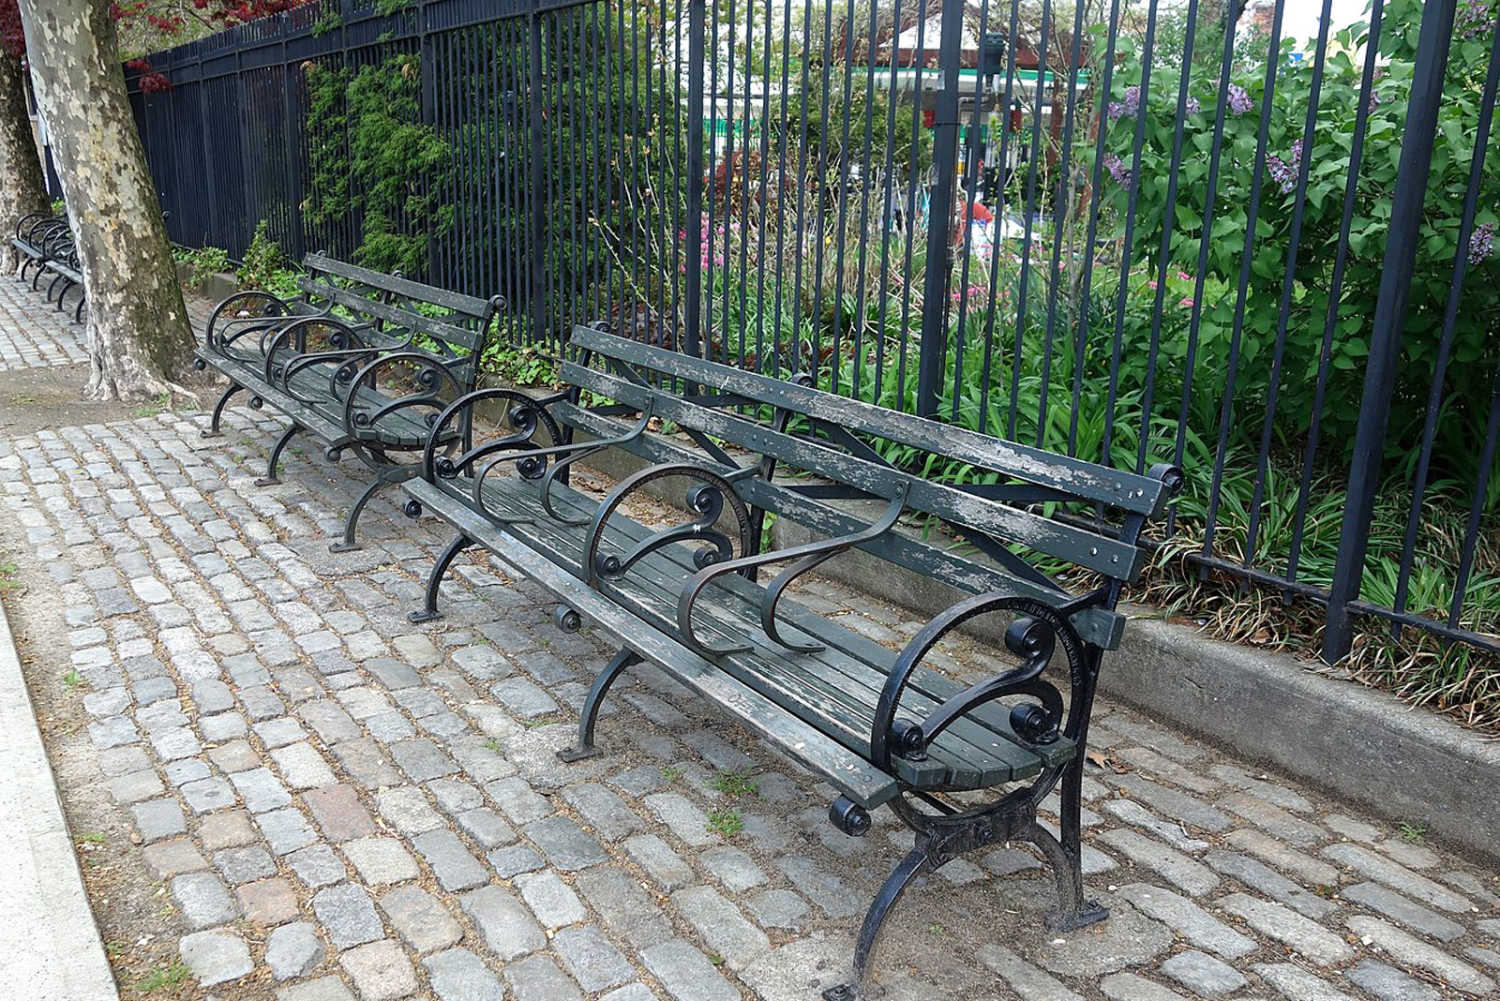 Examples of hostile architecture — these railings make it impossible to lay down and the fence blocks access to the park. Credit: Tdorante10 Wikimedia Commons